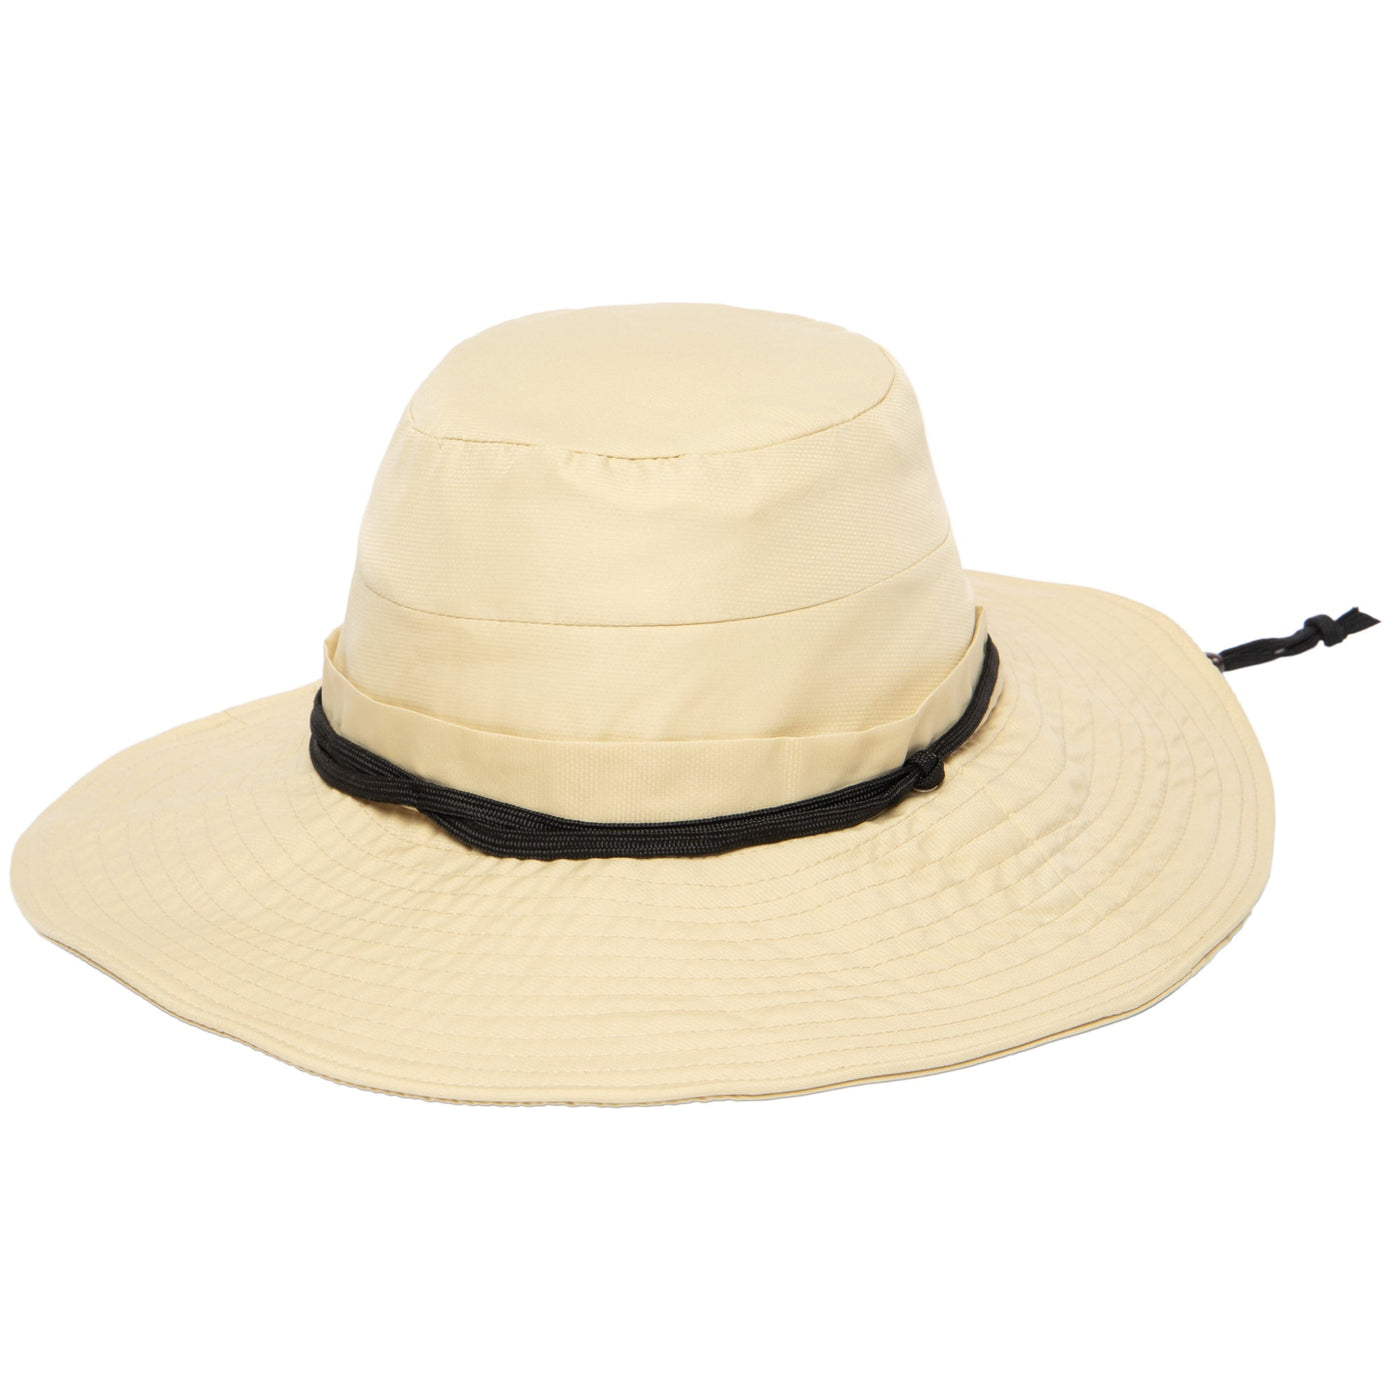 Optimized Product Title: Womens Wide Brim Packable Summer Hat With Strap  Rope UV Protection For Cycling, Hiking, And Sports From Jeremylamb, $7.11